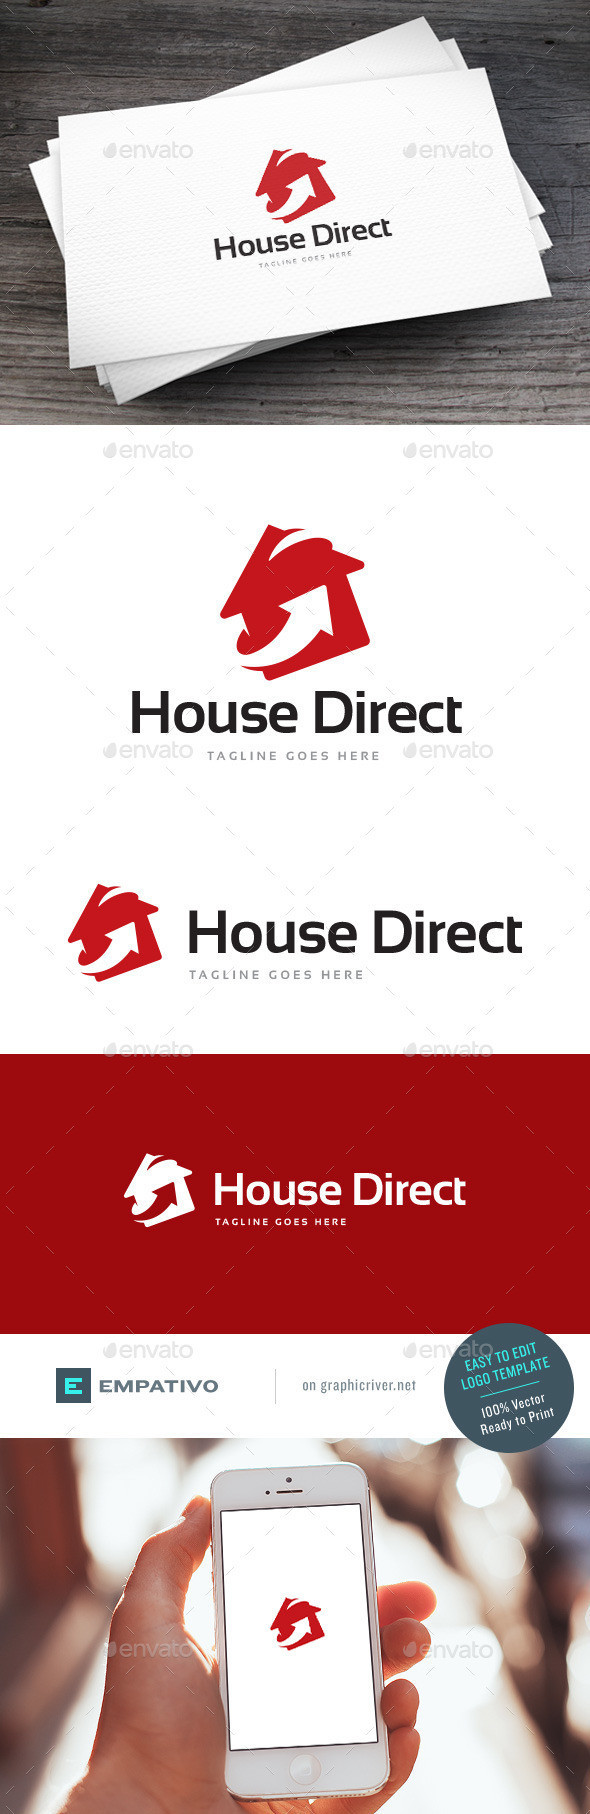 House direct logo template